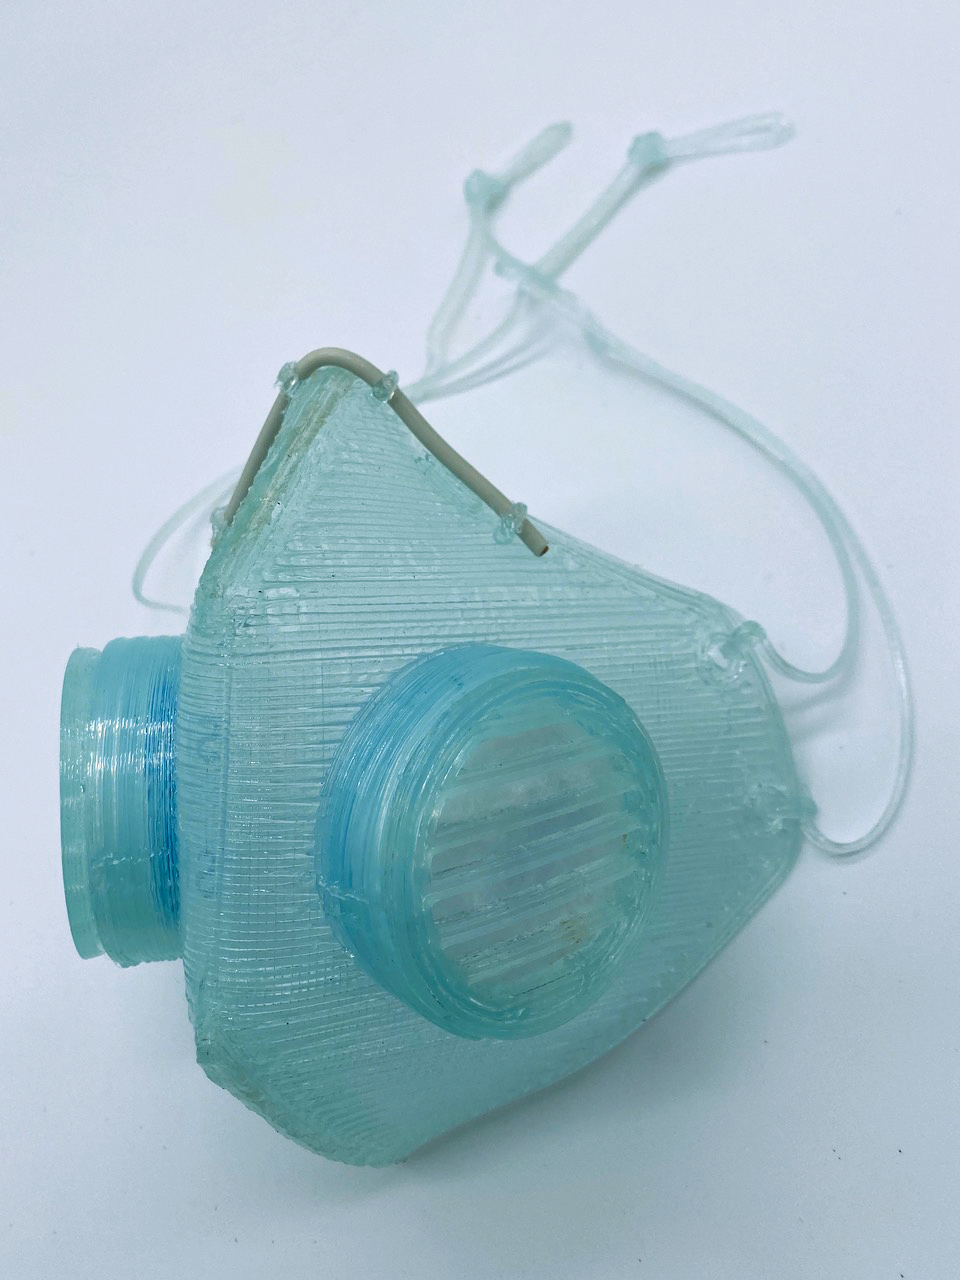 Light blue translucent respirator with two disk-like protrusions